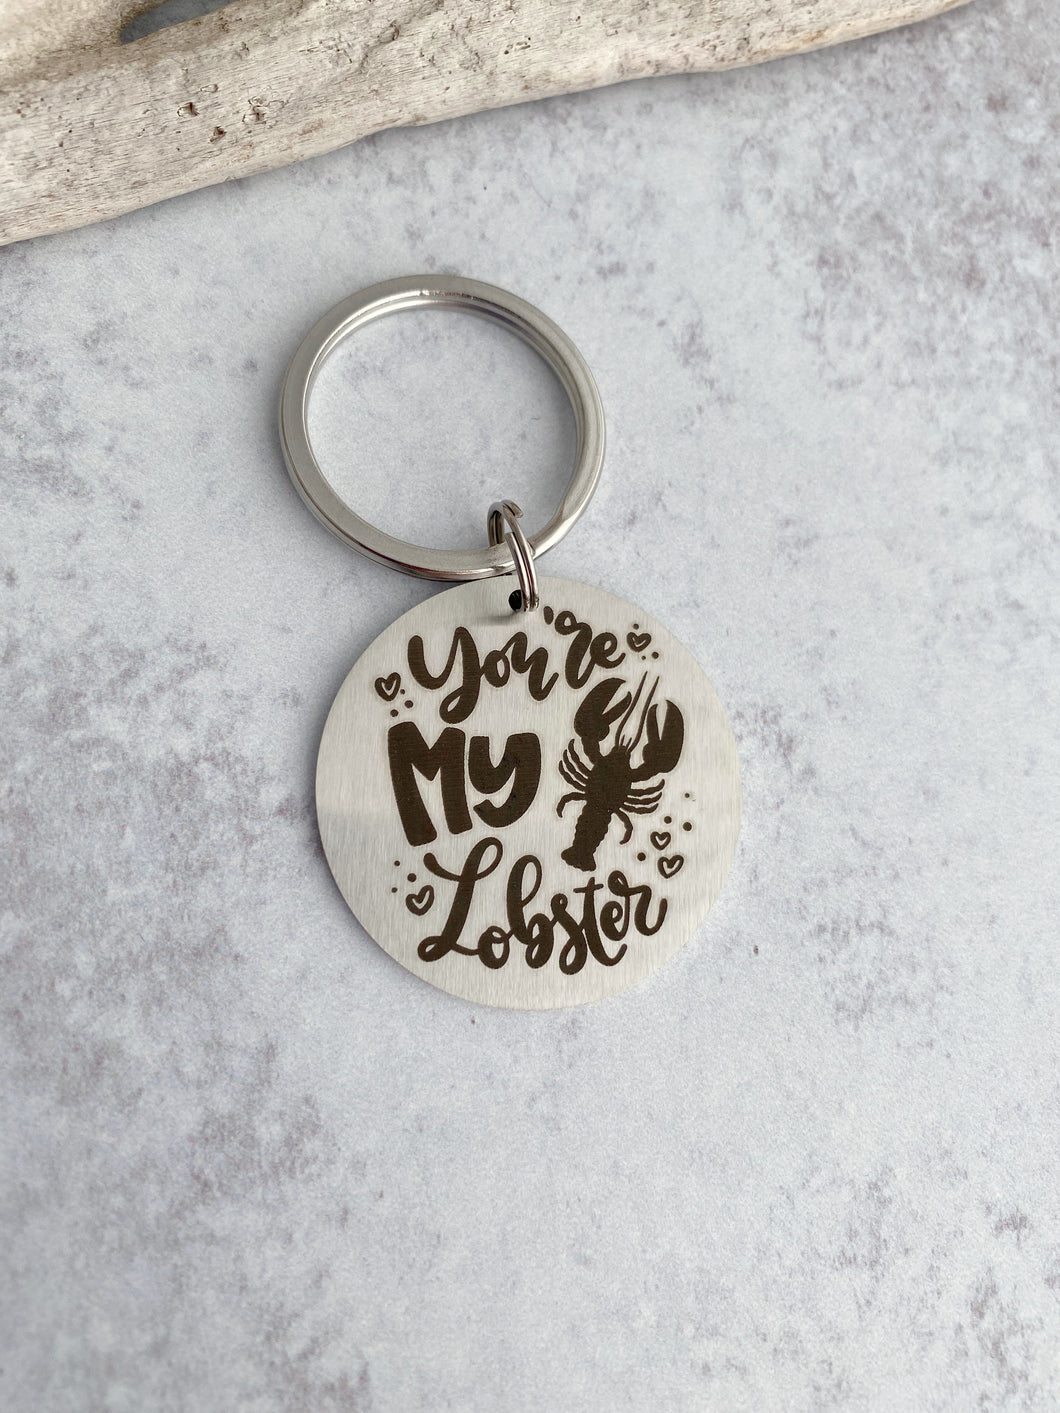 you're my lobster - engraved stainless steel keychain - gift idea